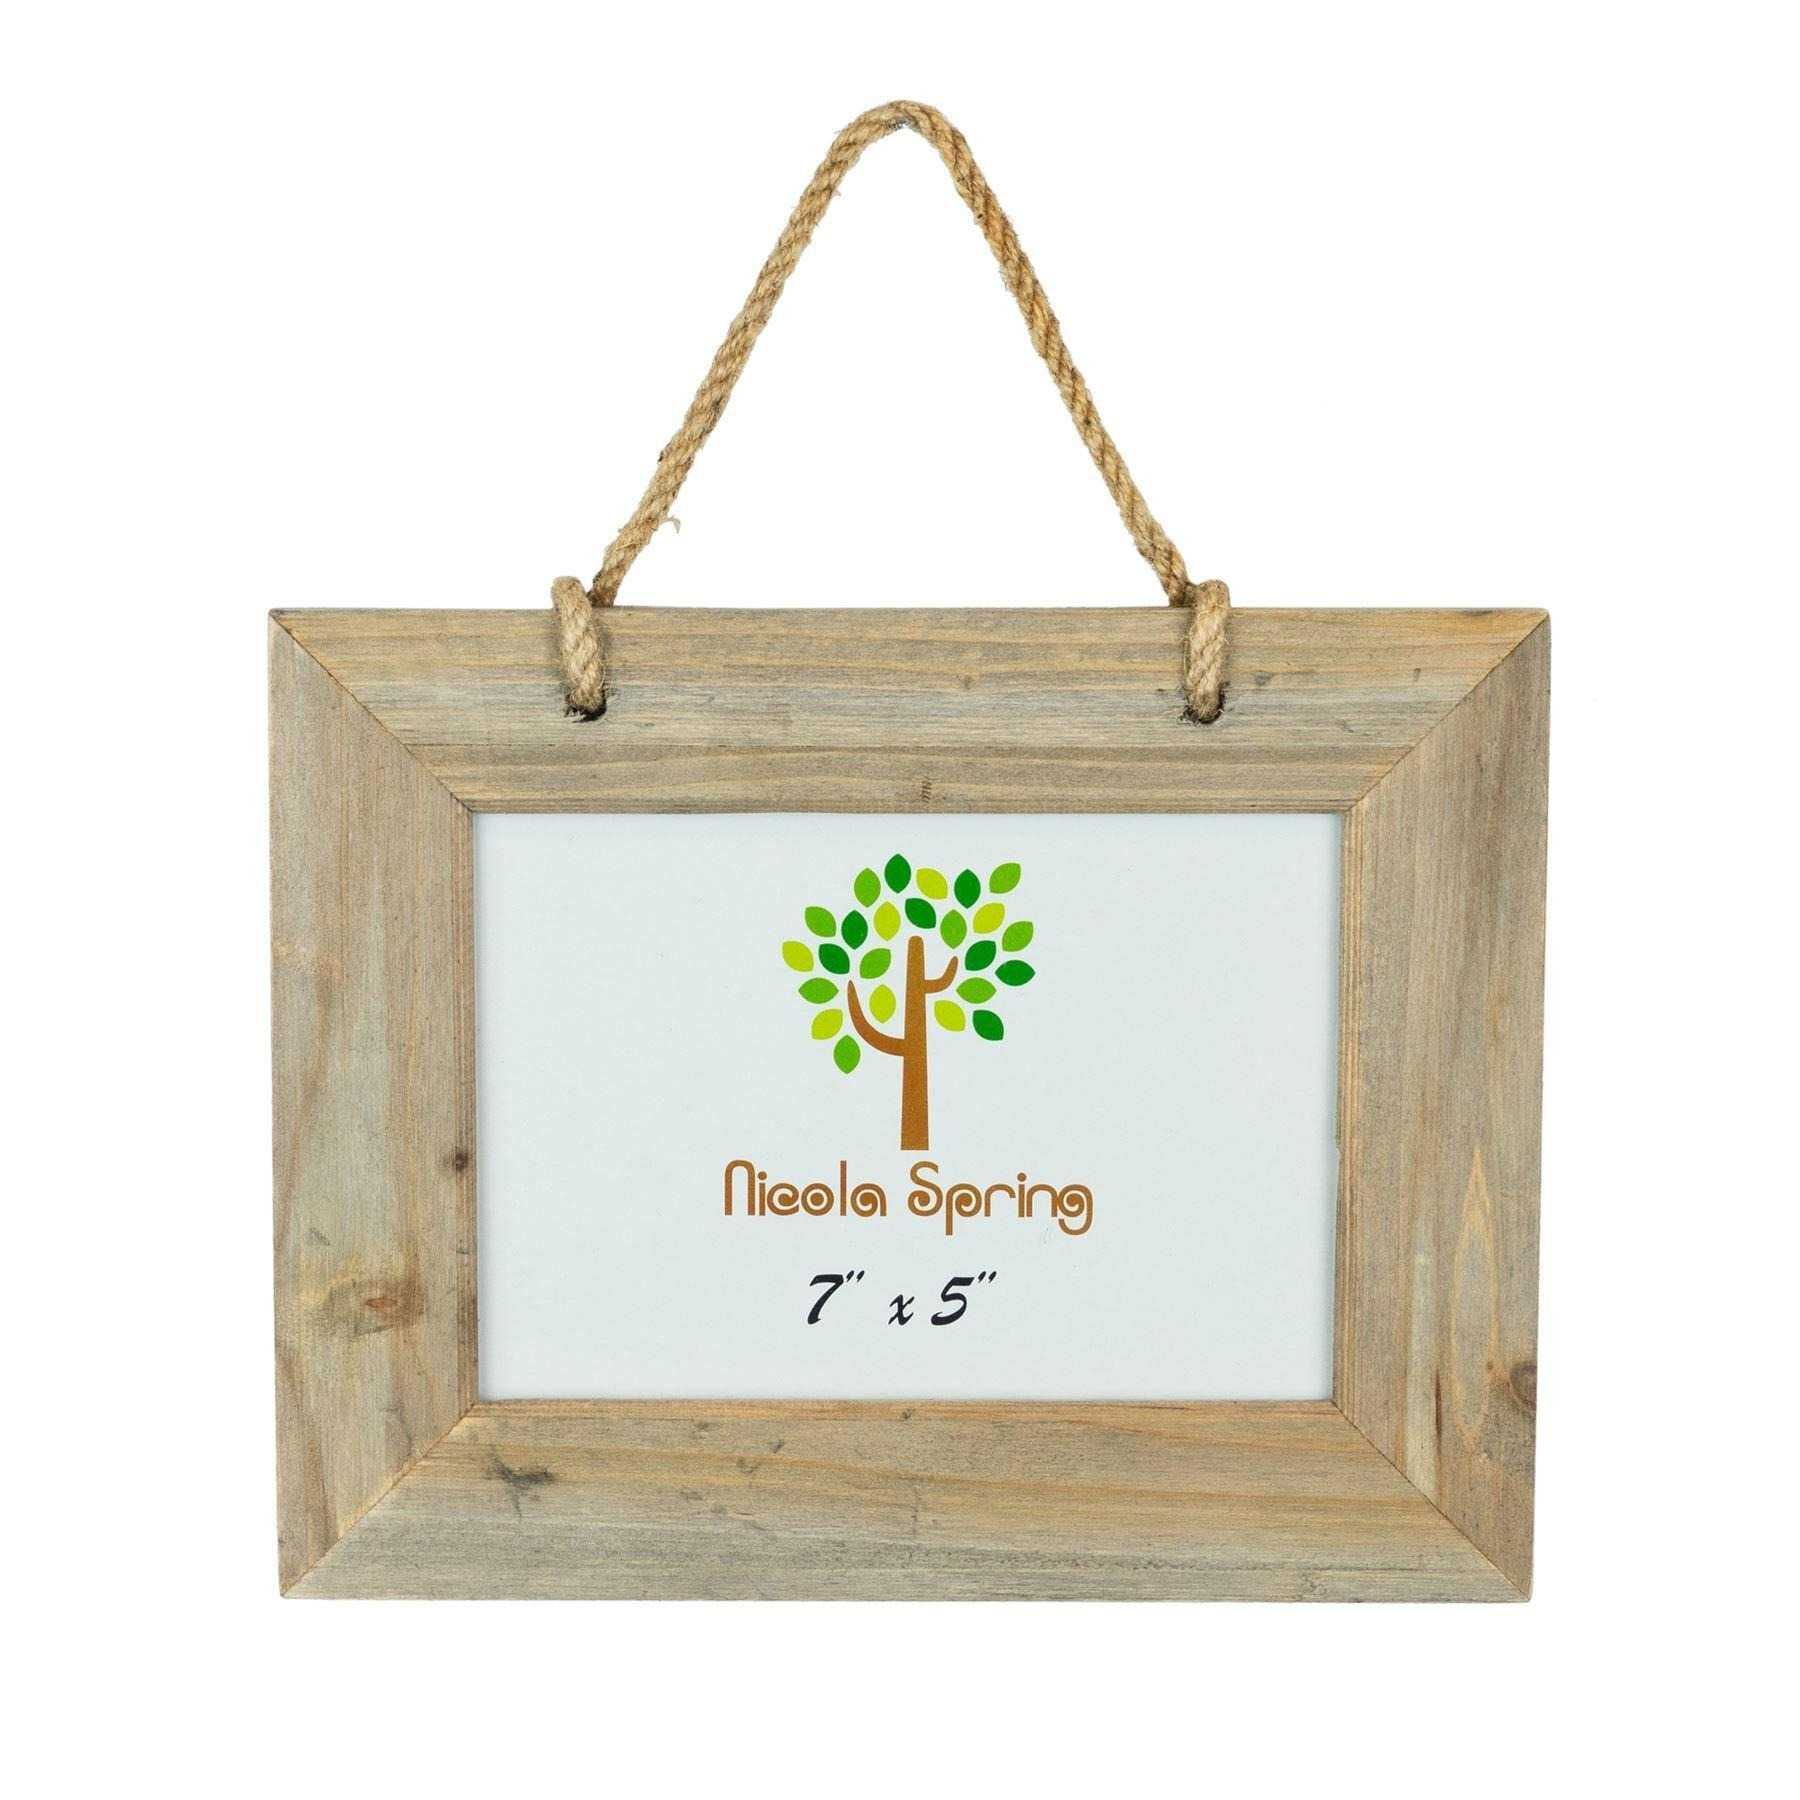 "Natural 7x5"" Rustic Wooden Hanging Photo Frame" - image 1